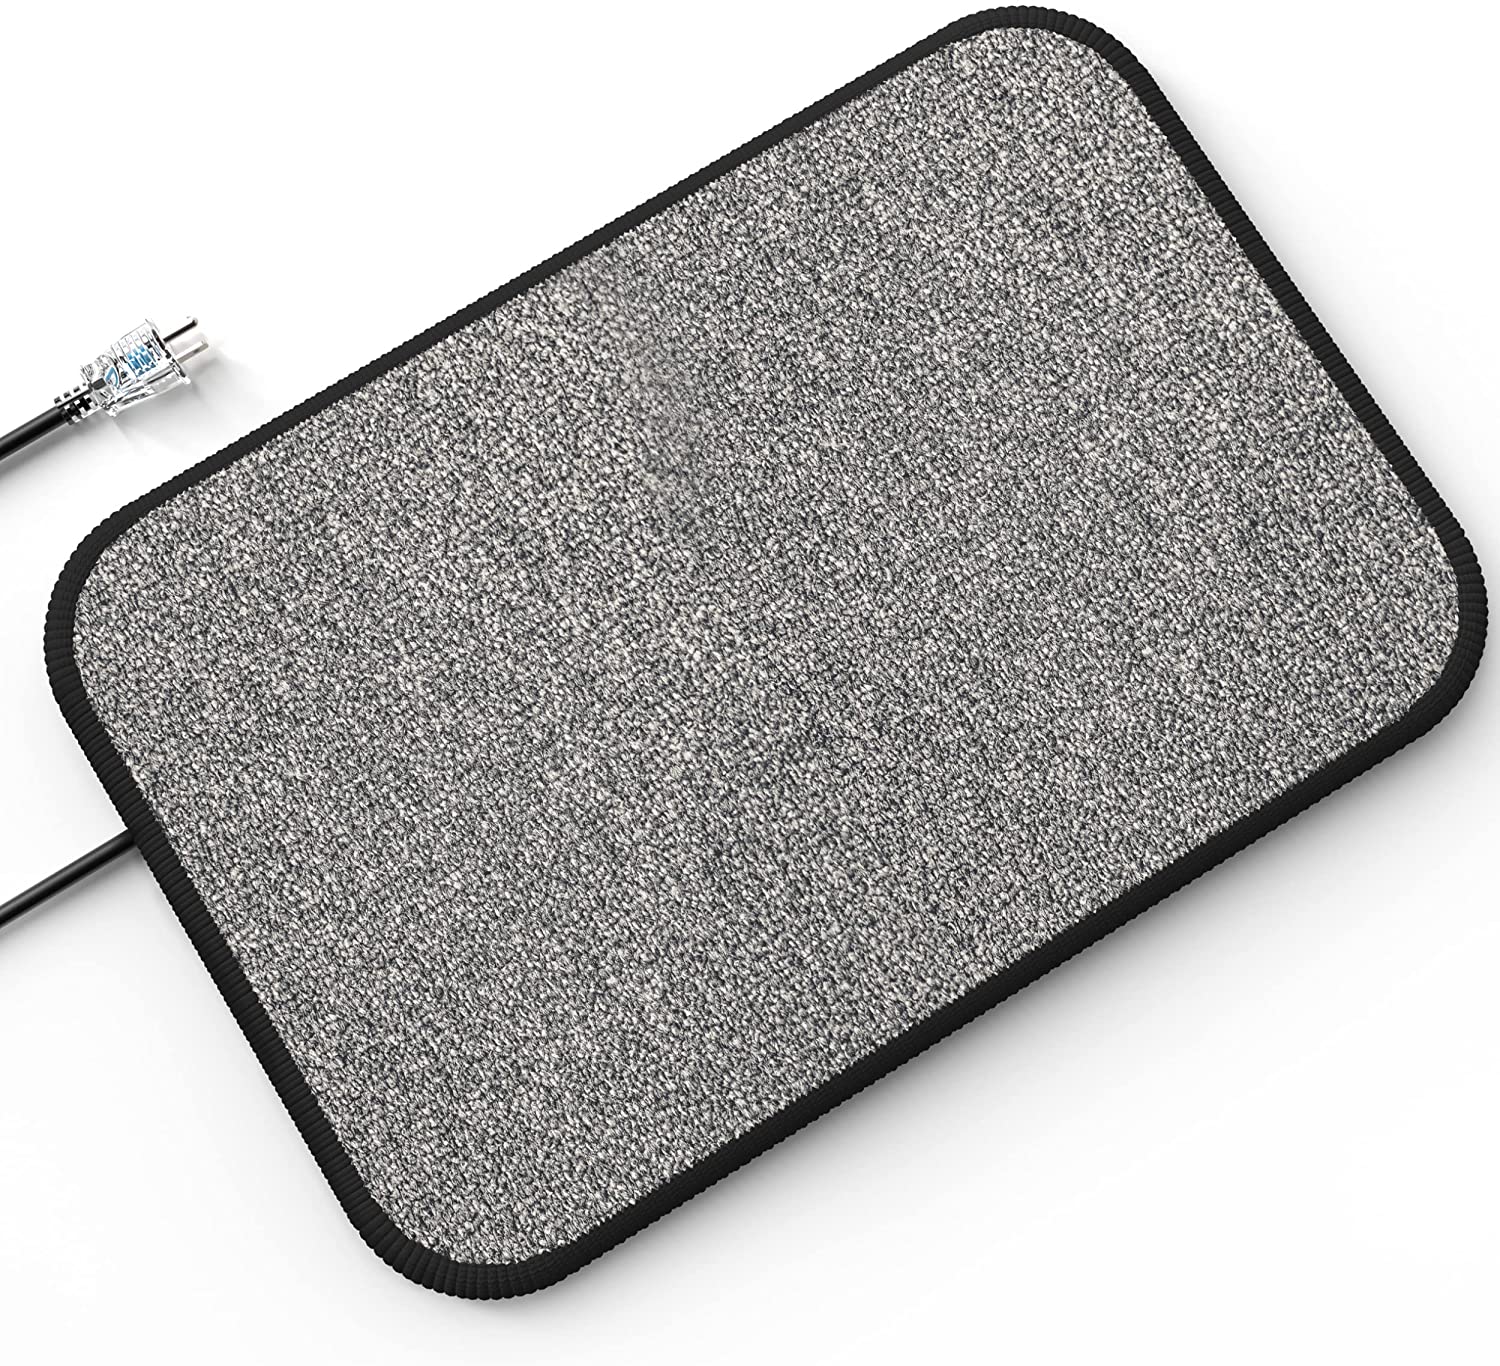 EconoHome Electric Heated Foot Warmer Mat For Office Or Home– Wholesale Home